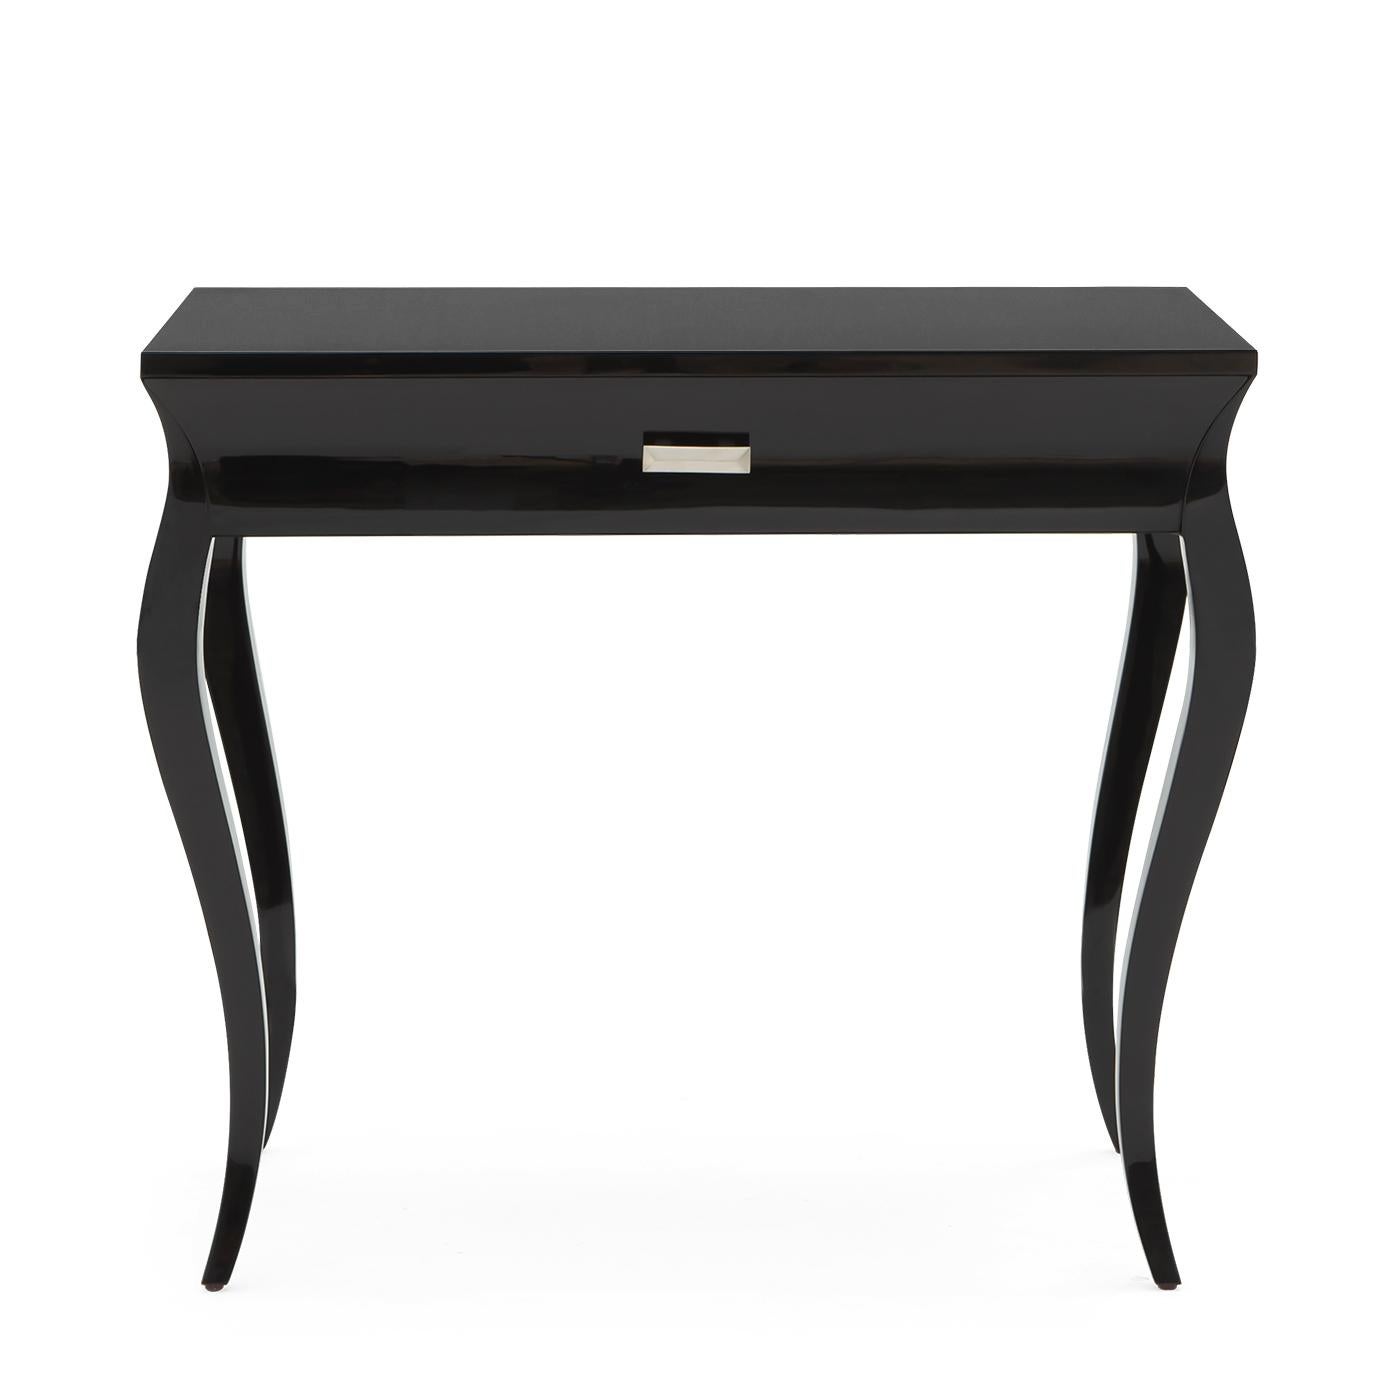 Side table or nightstand Elda with structure
in solid mahogany wood, hand carved wood in
black lacquered finish. with veneered mahogany 
top. Includes 1 drawer with ultra suede lining inside 
and drawer with easy glide system.
Also available in